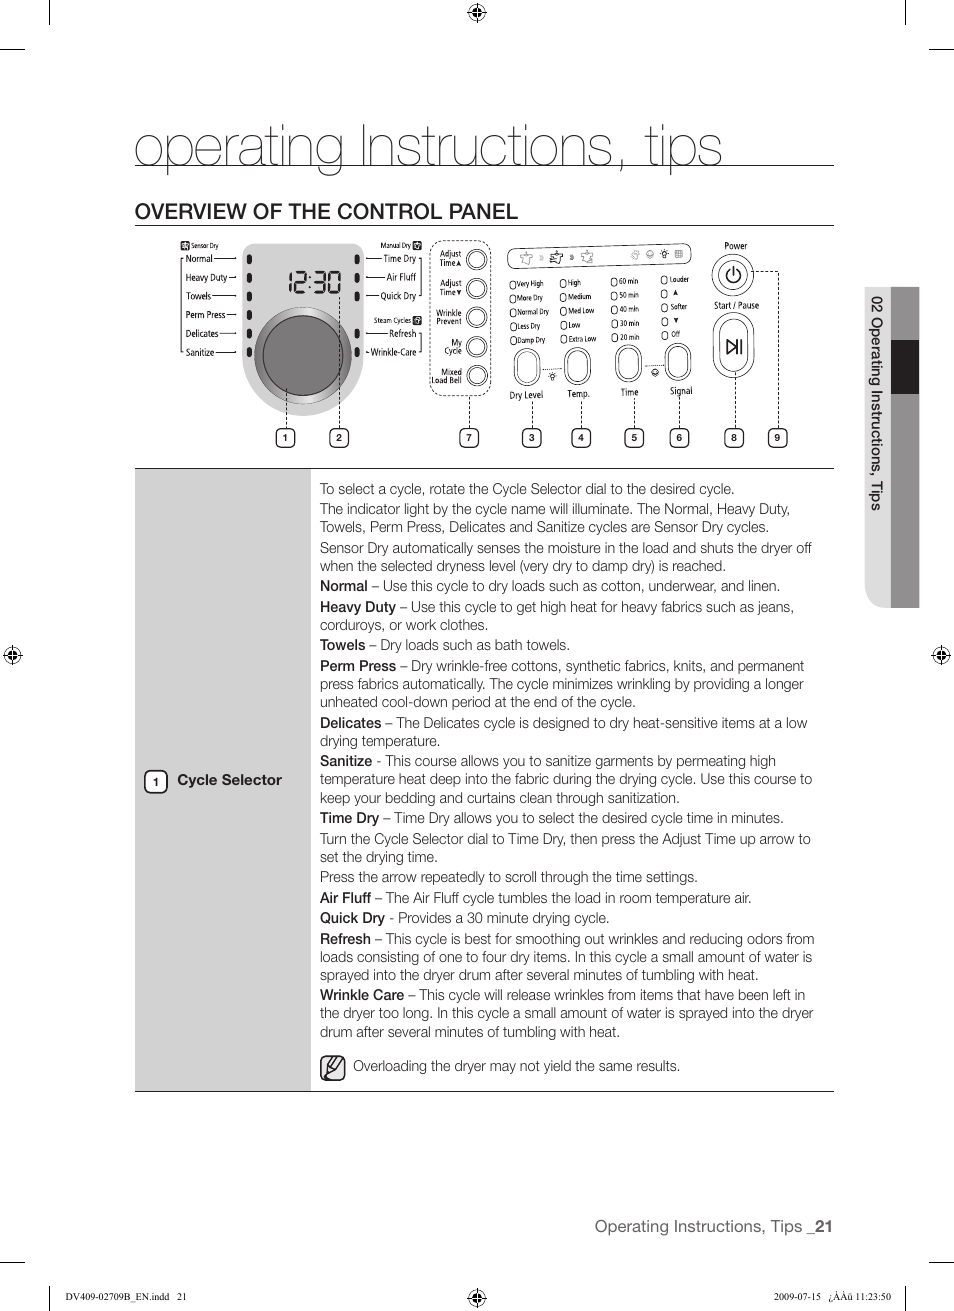 Operating instructions, tips, Overview of the control panel | Samsung